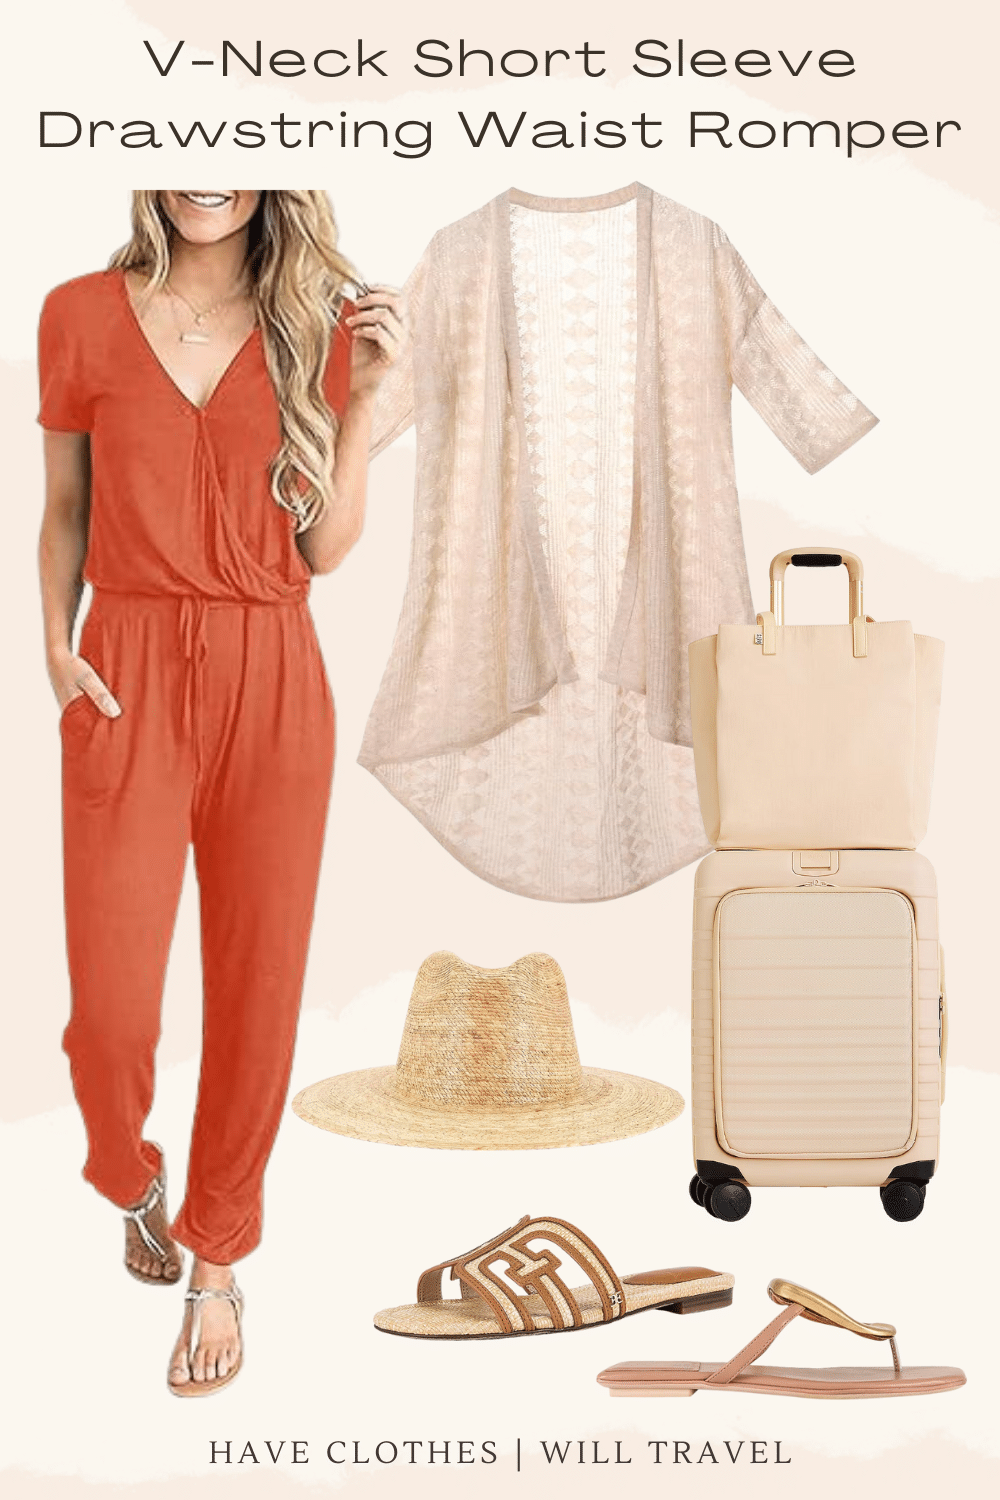 Travel Outfits for Summer: What to Wear on Vacation